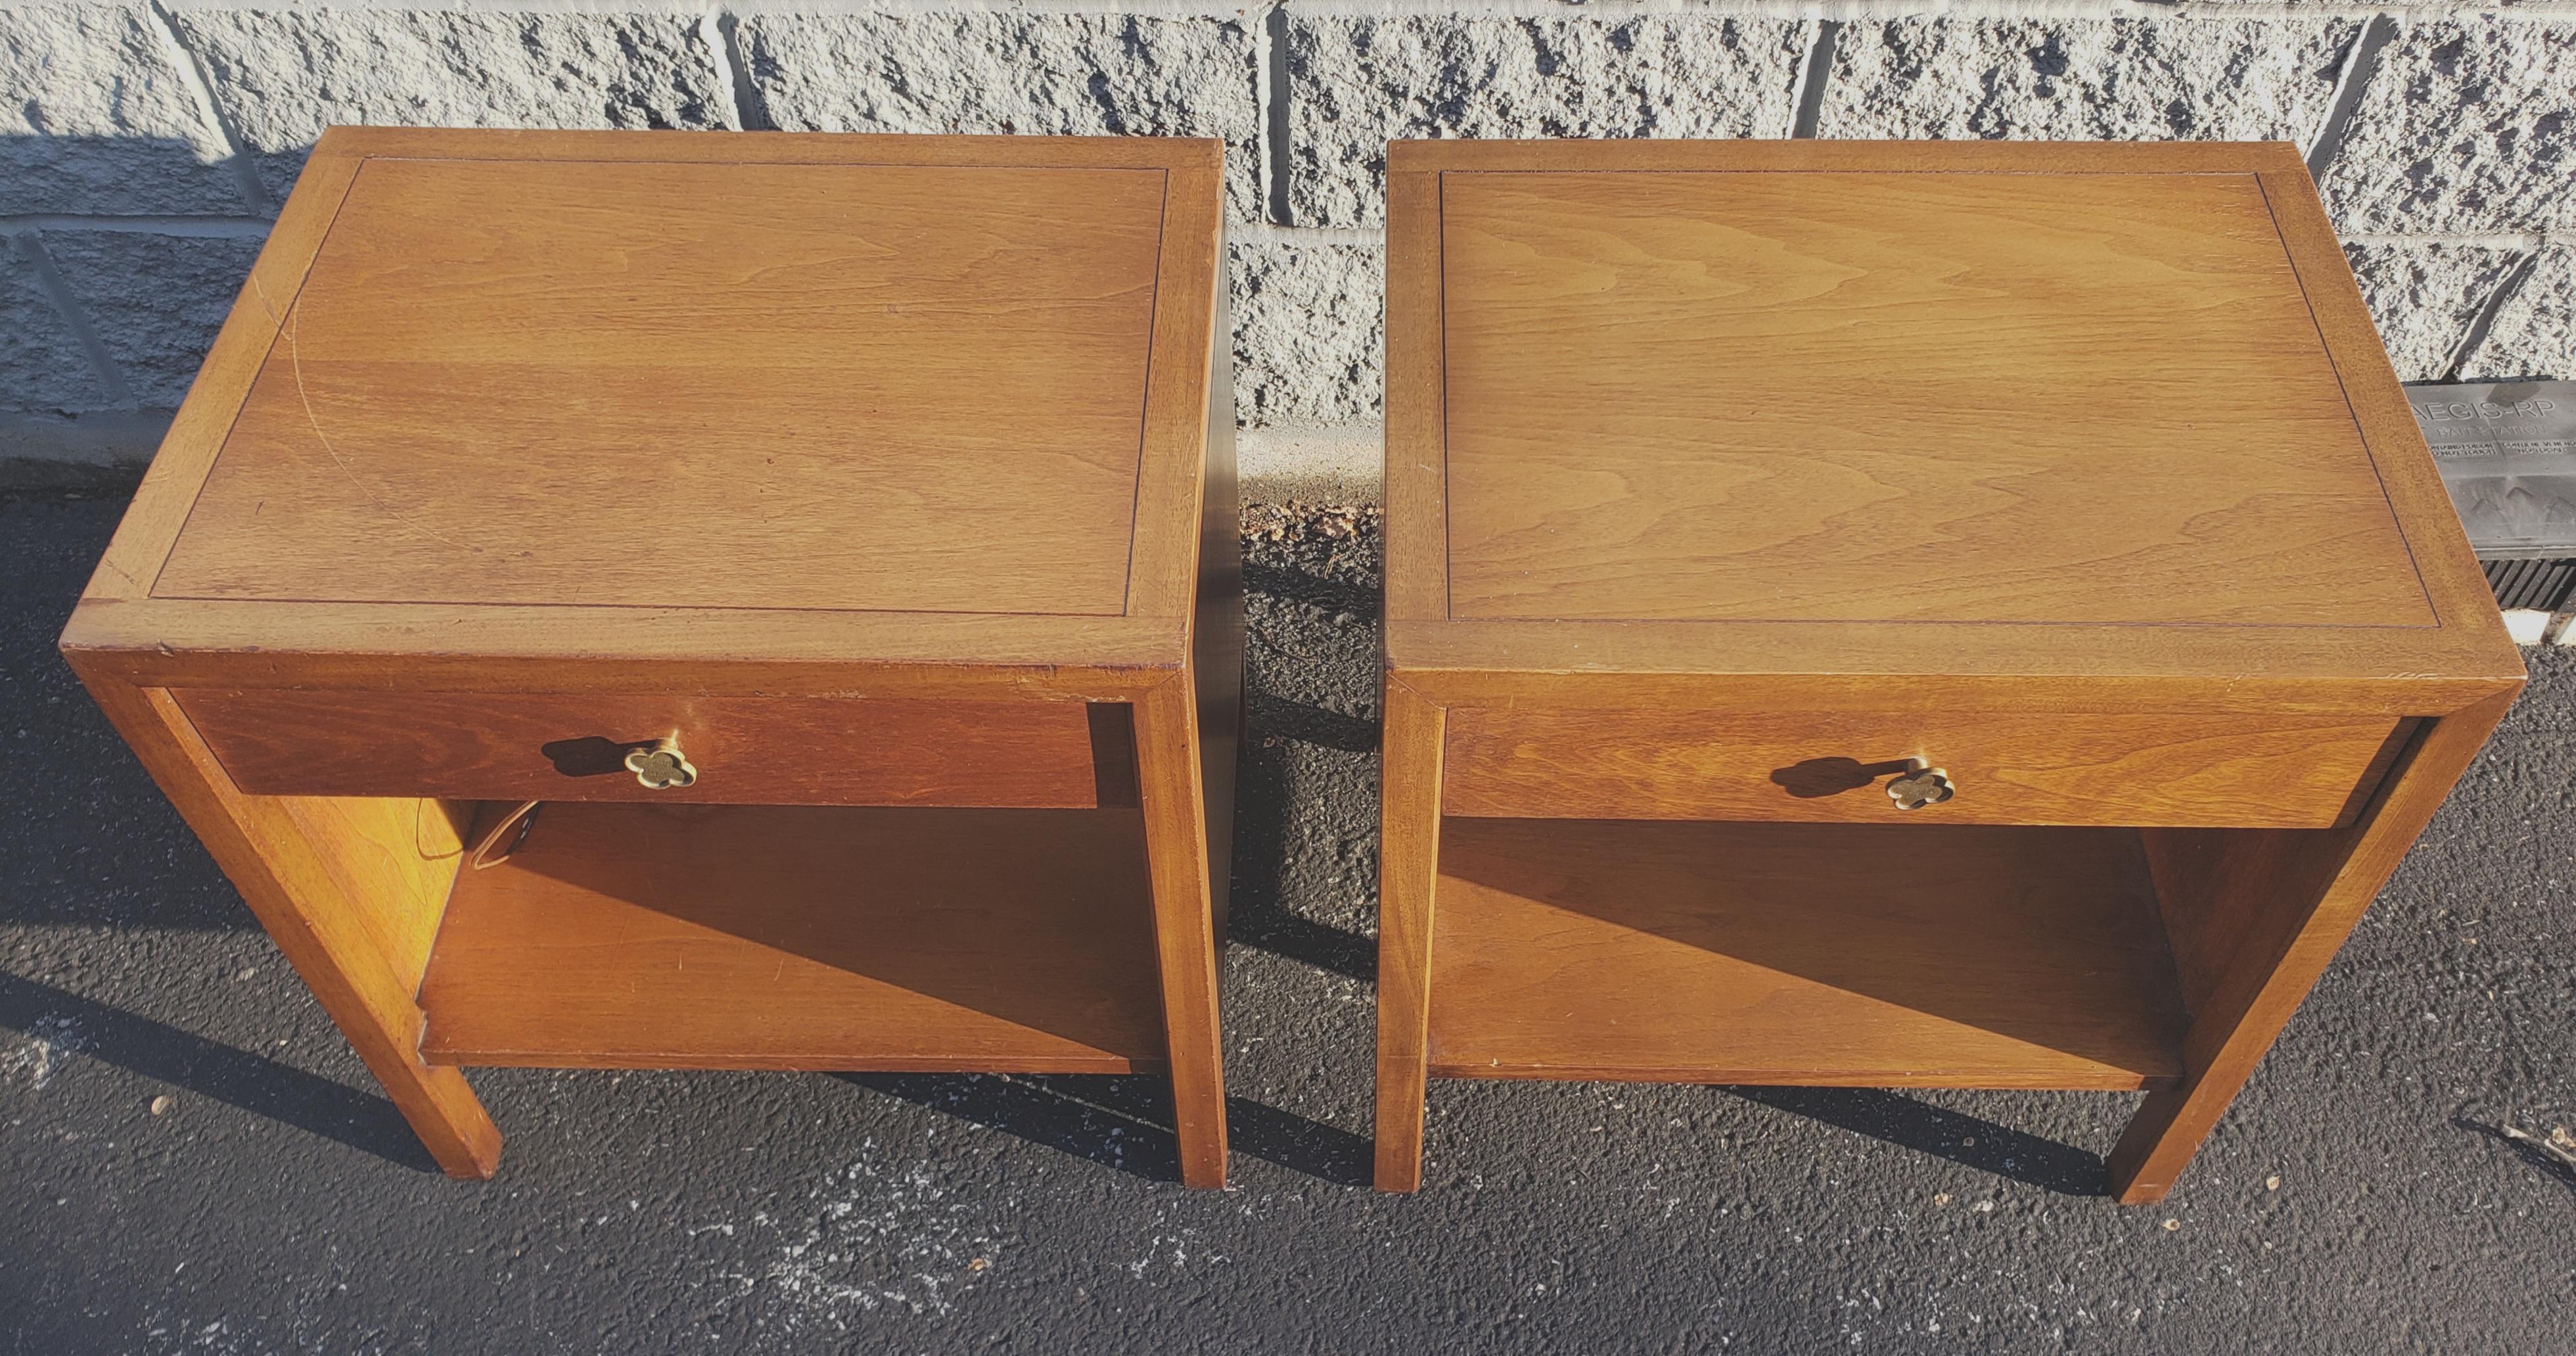 Mid-Century Modern Henredon Walnut Bedside Tables Nightstands, A Pair In Good Condition For Sale In Germantown, MD